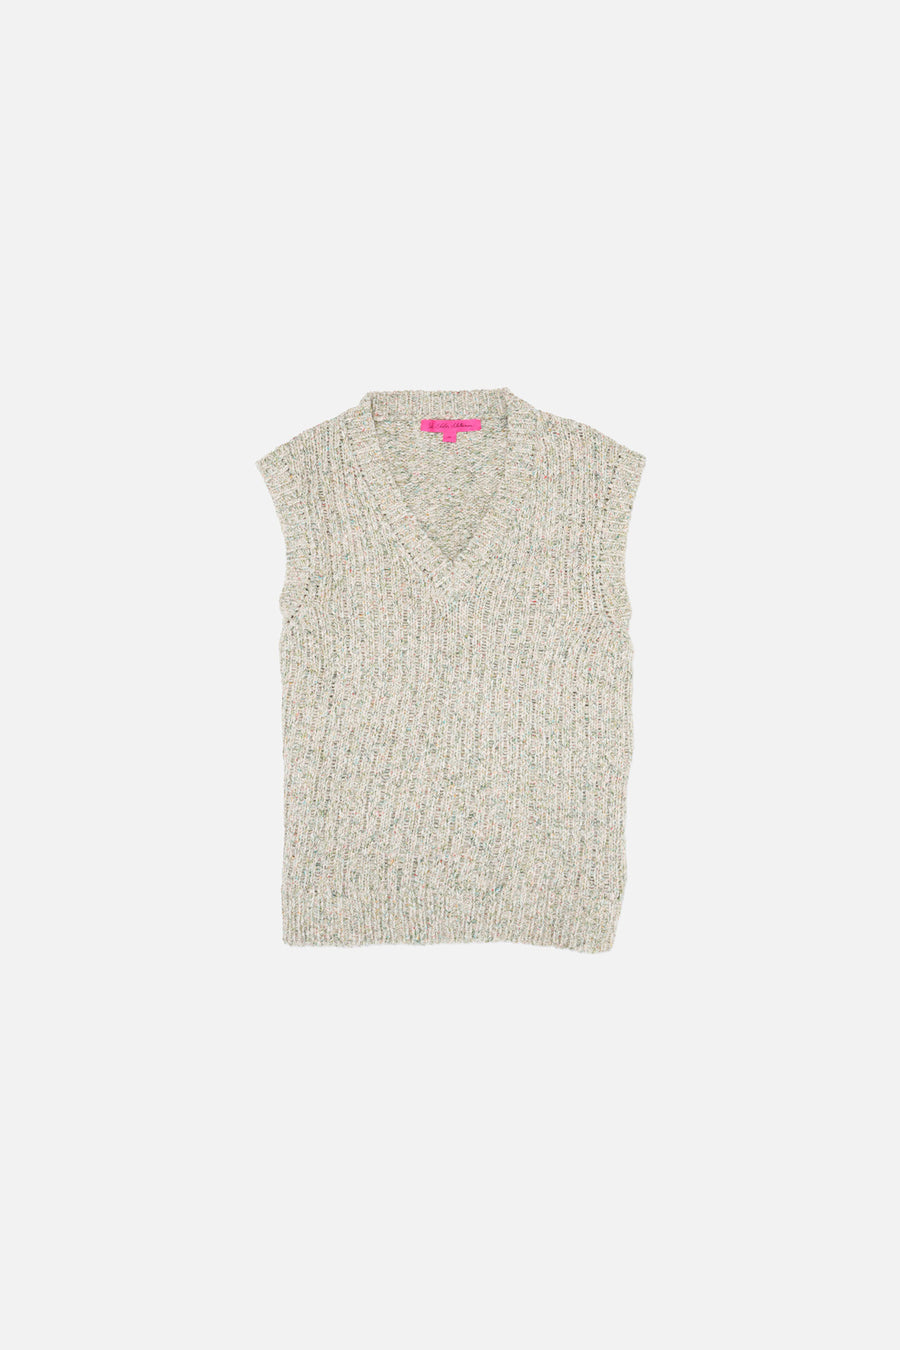 The Elder Statesman Men's Smiley Face Cashmere Sweater Vest, Hickory/Blue Jay/, Men's, Small, Sweaters Cashmere Sweaters